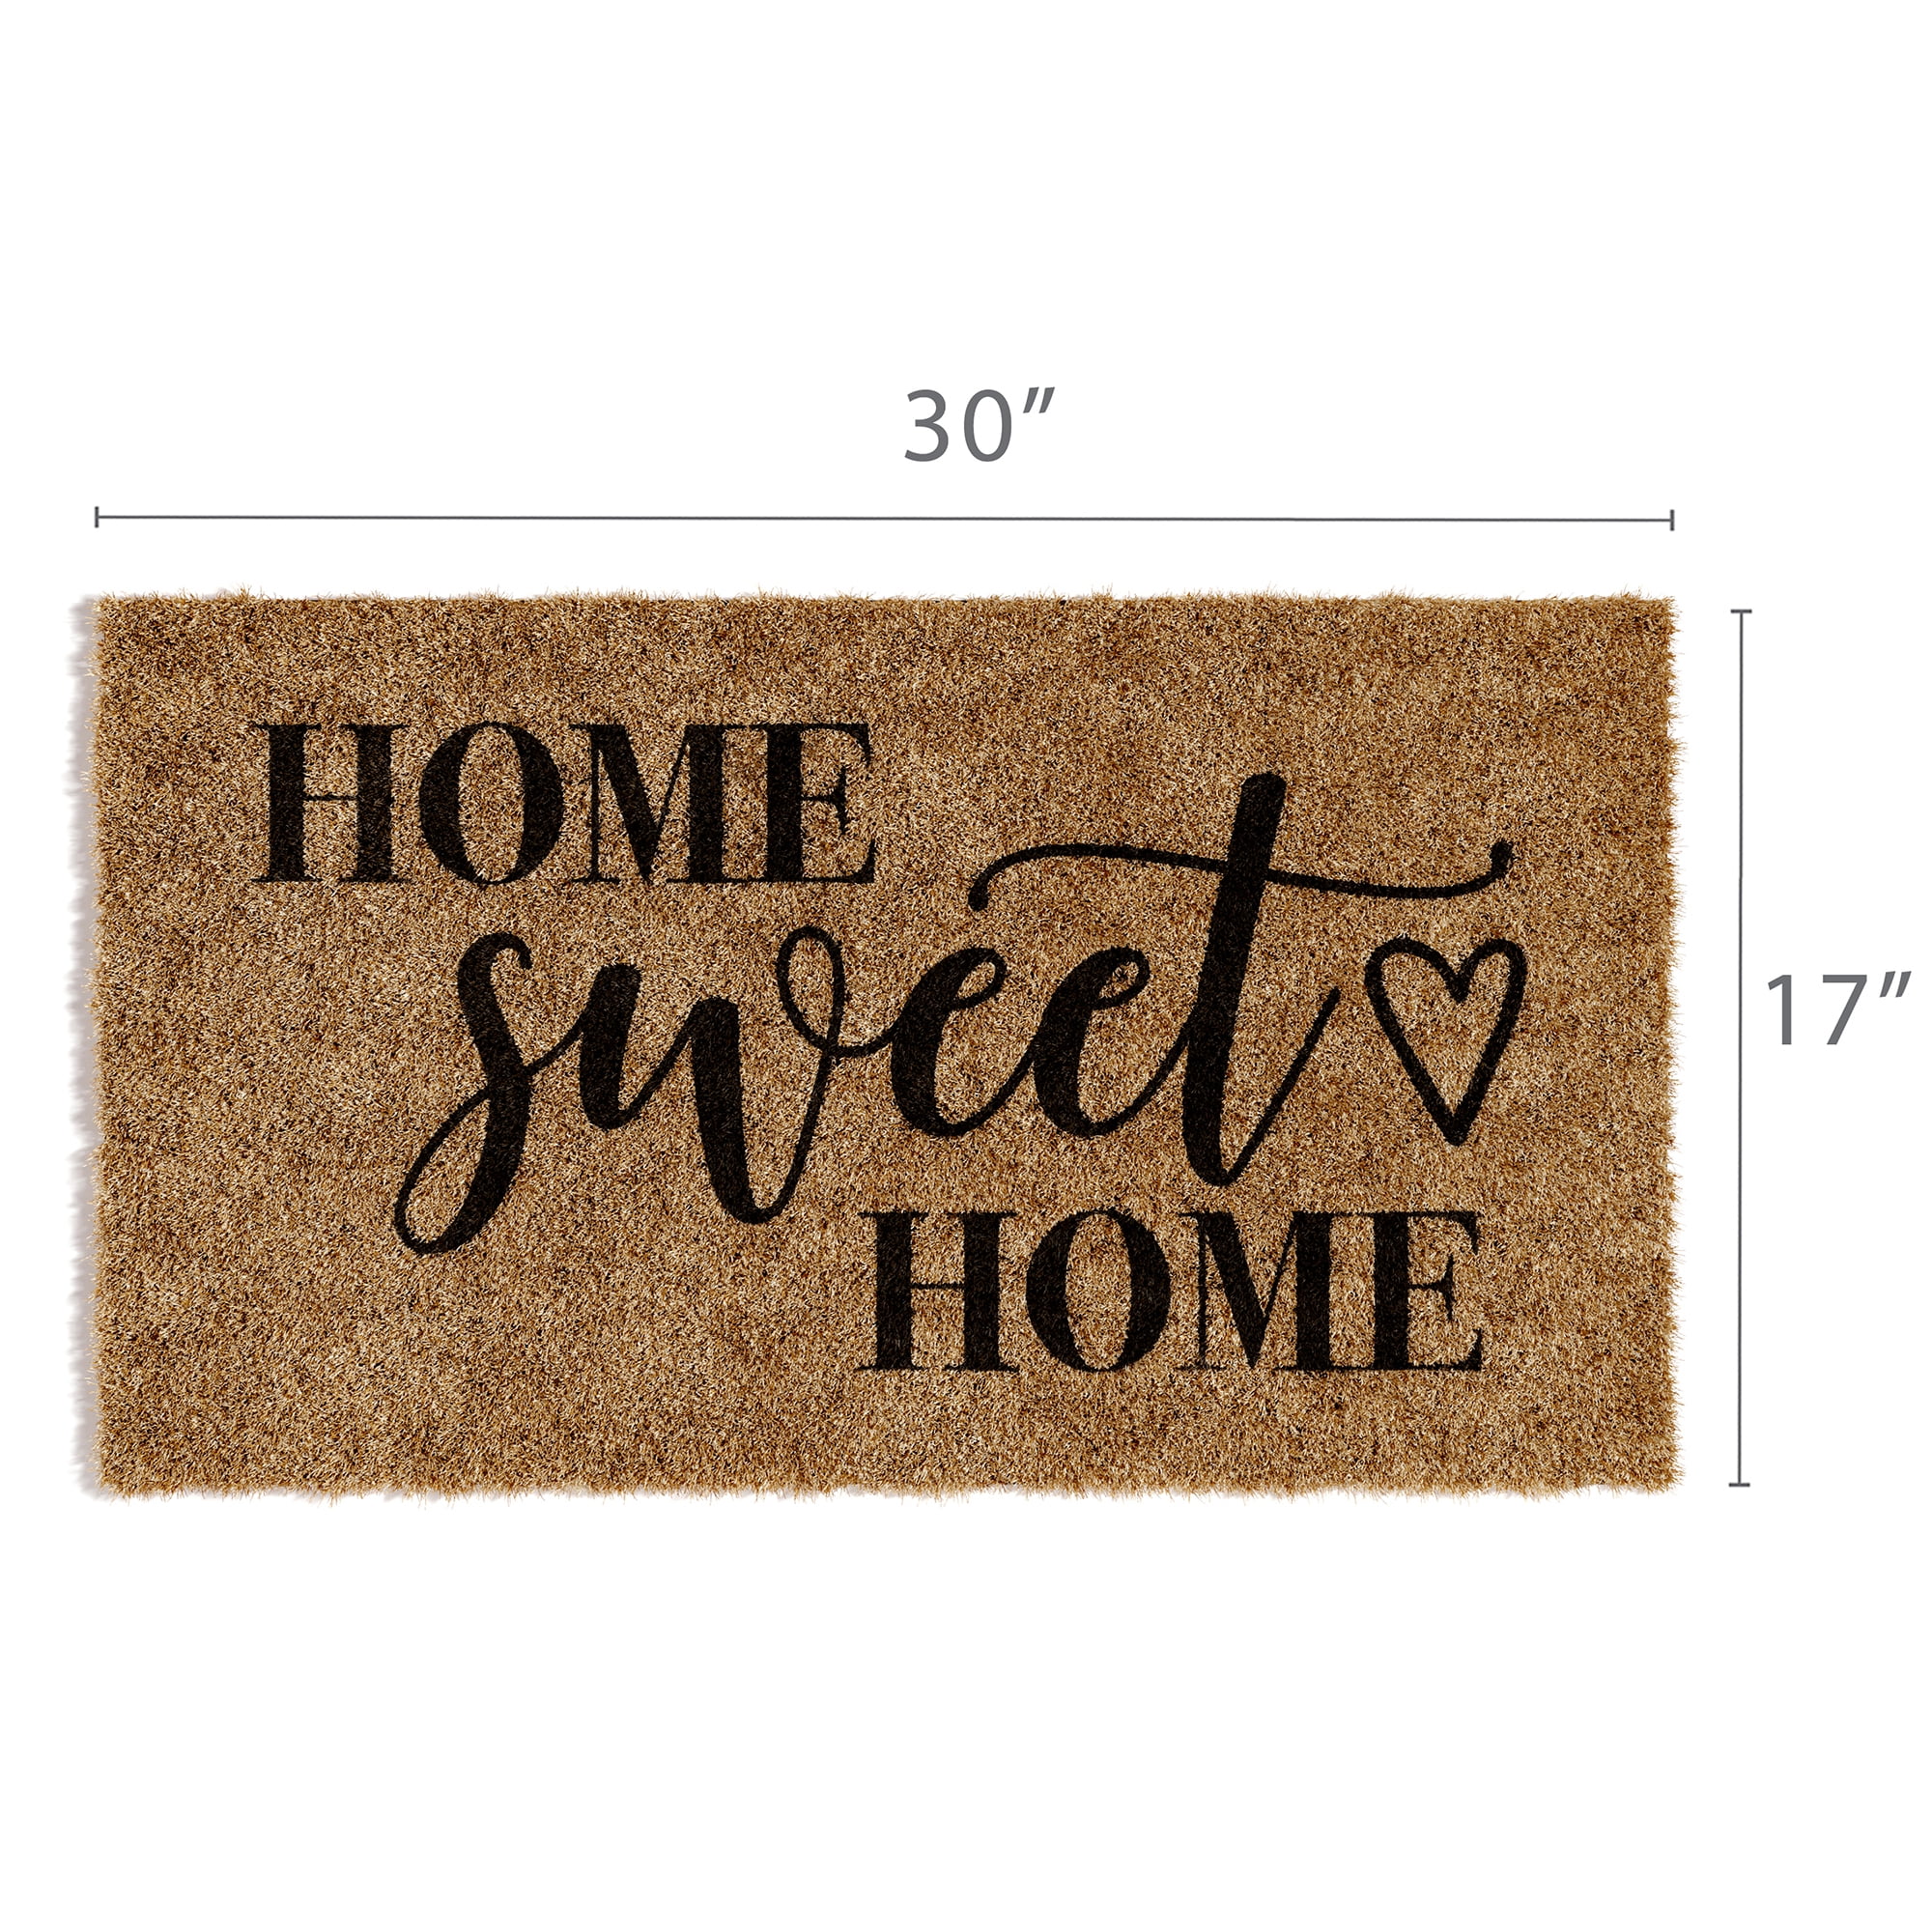 Small Packages Sitting on Home Sweet Home Welcome Mat At Front Door of  House. 16358547 Stock Photo at Vecteezy